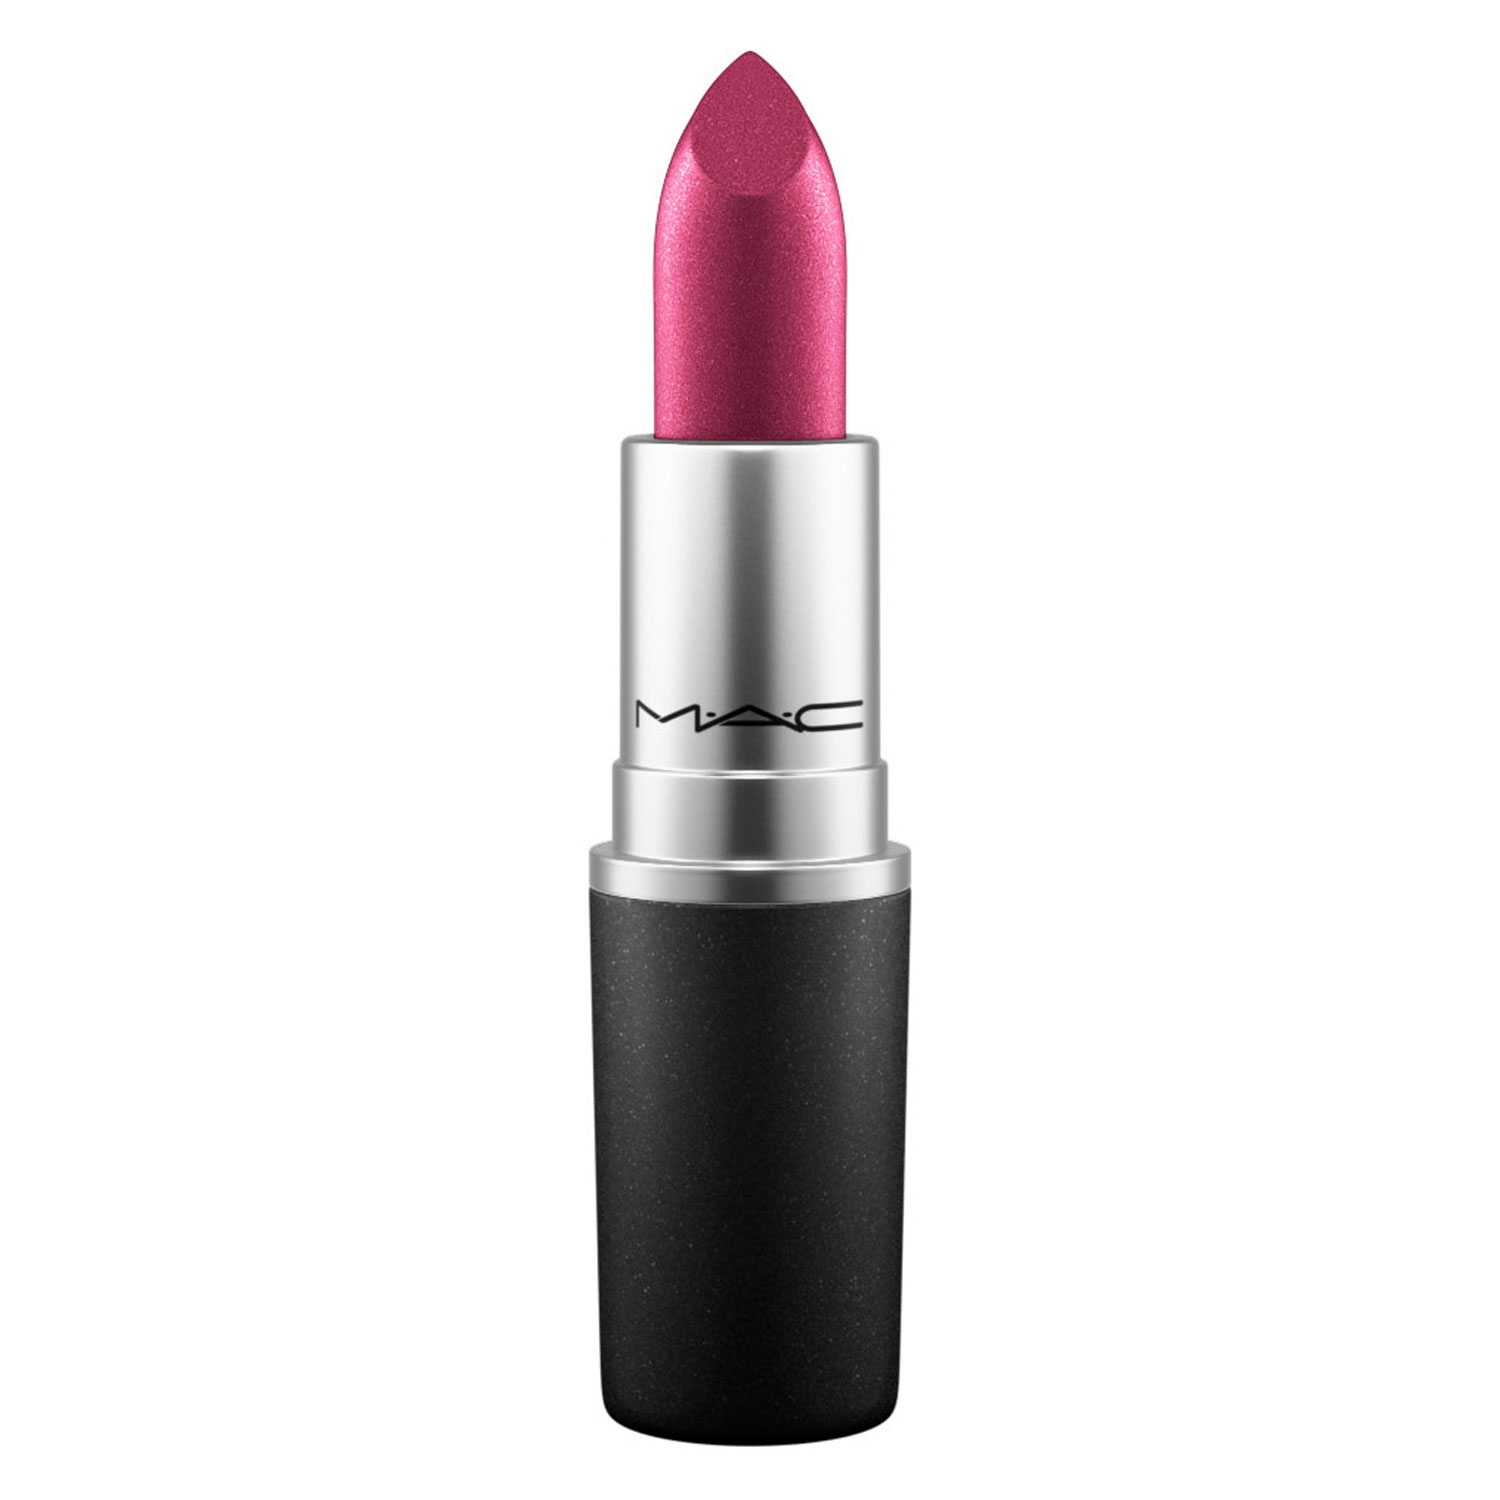 Product image from Frost Lipstick - New York Apple